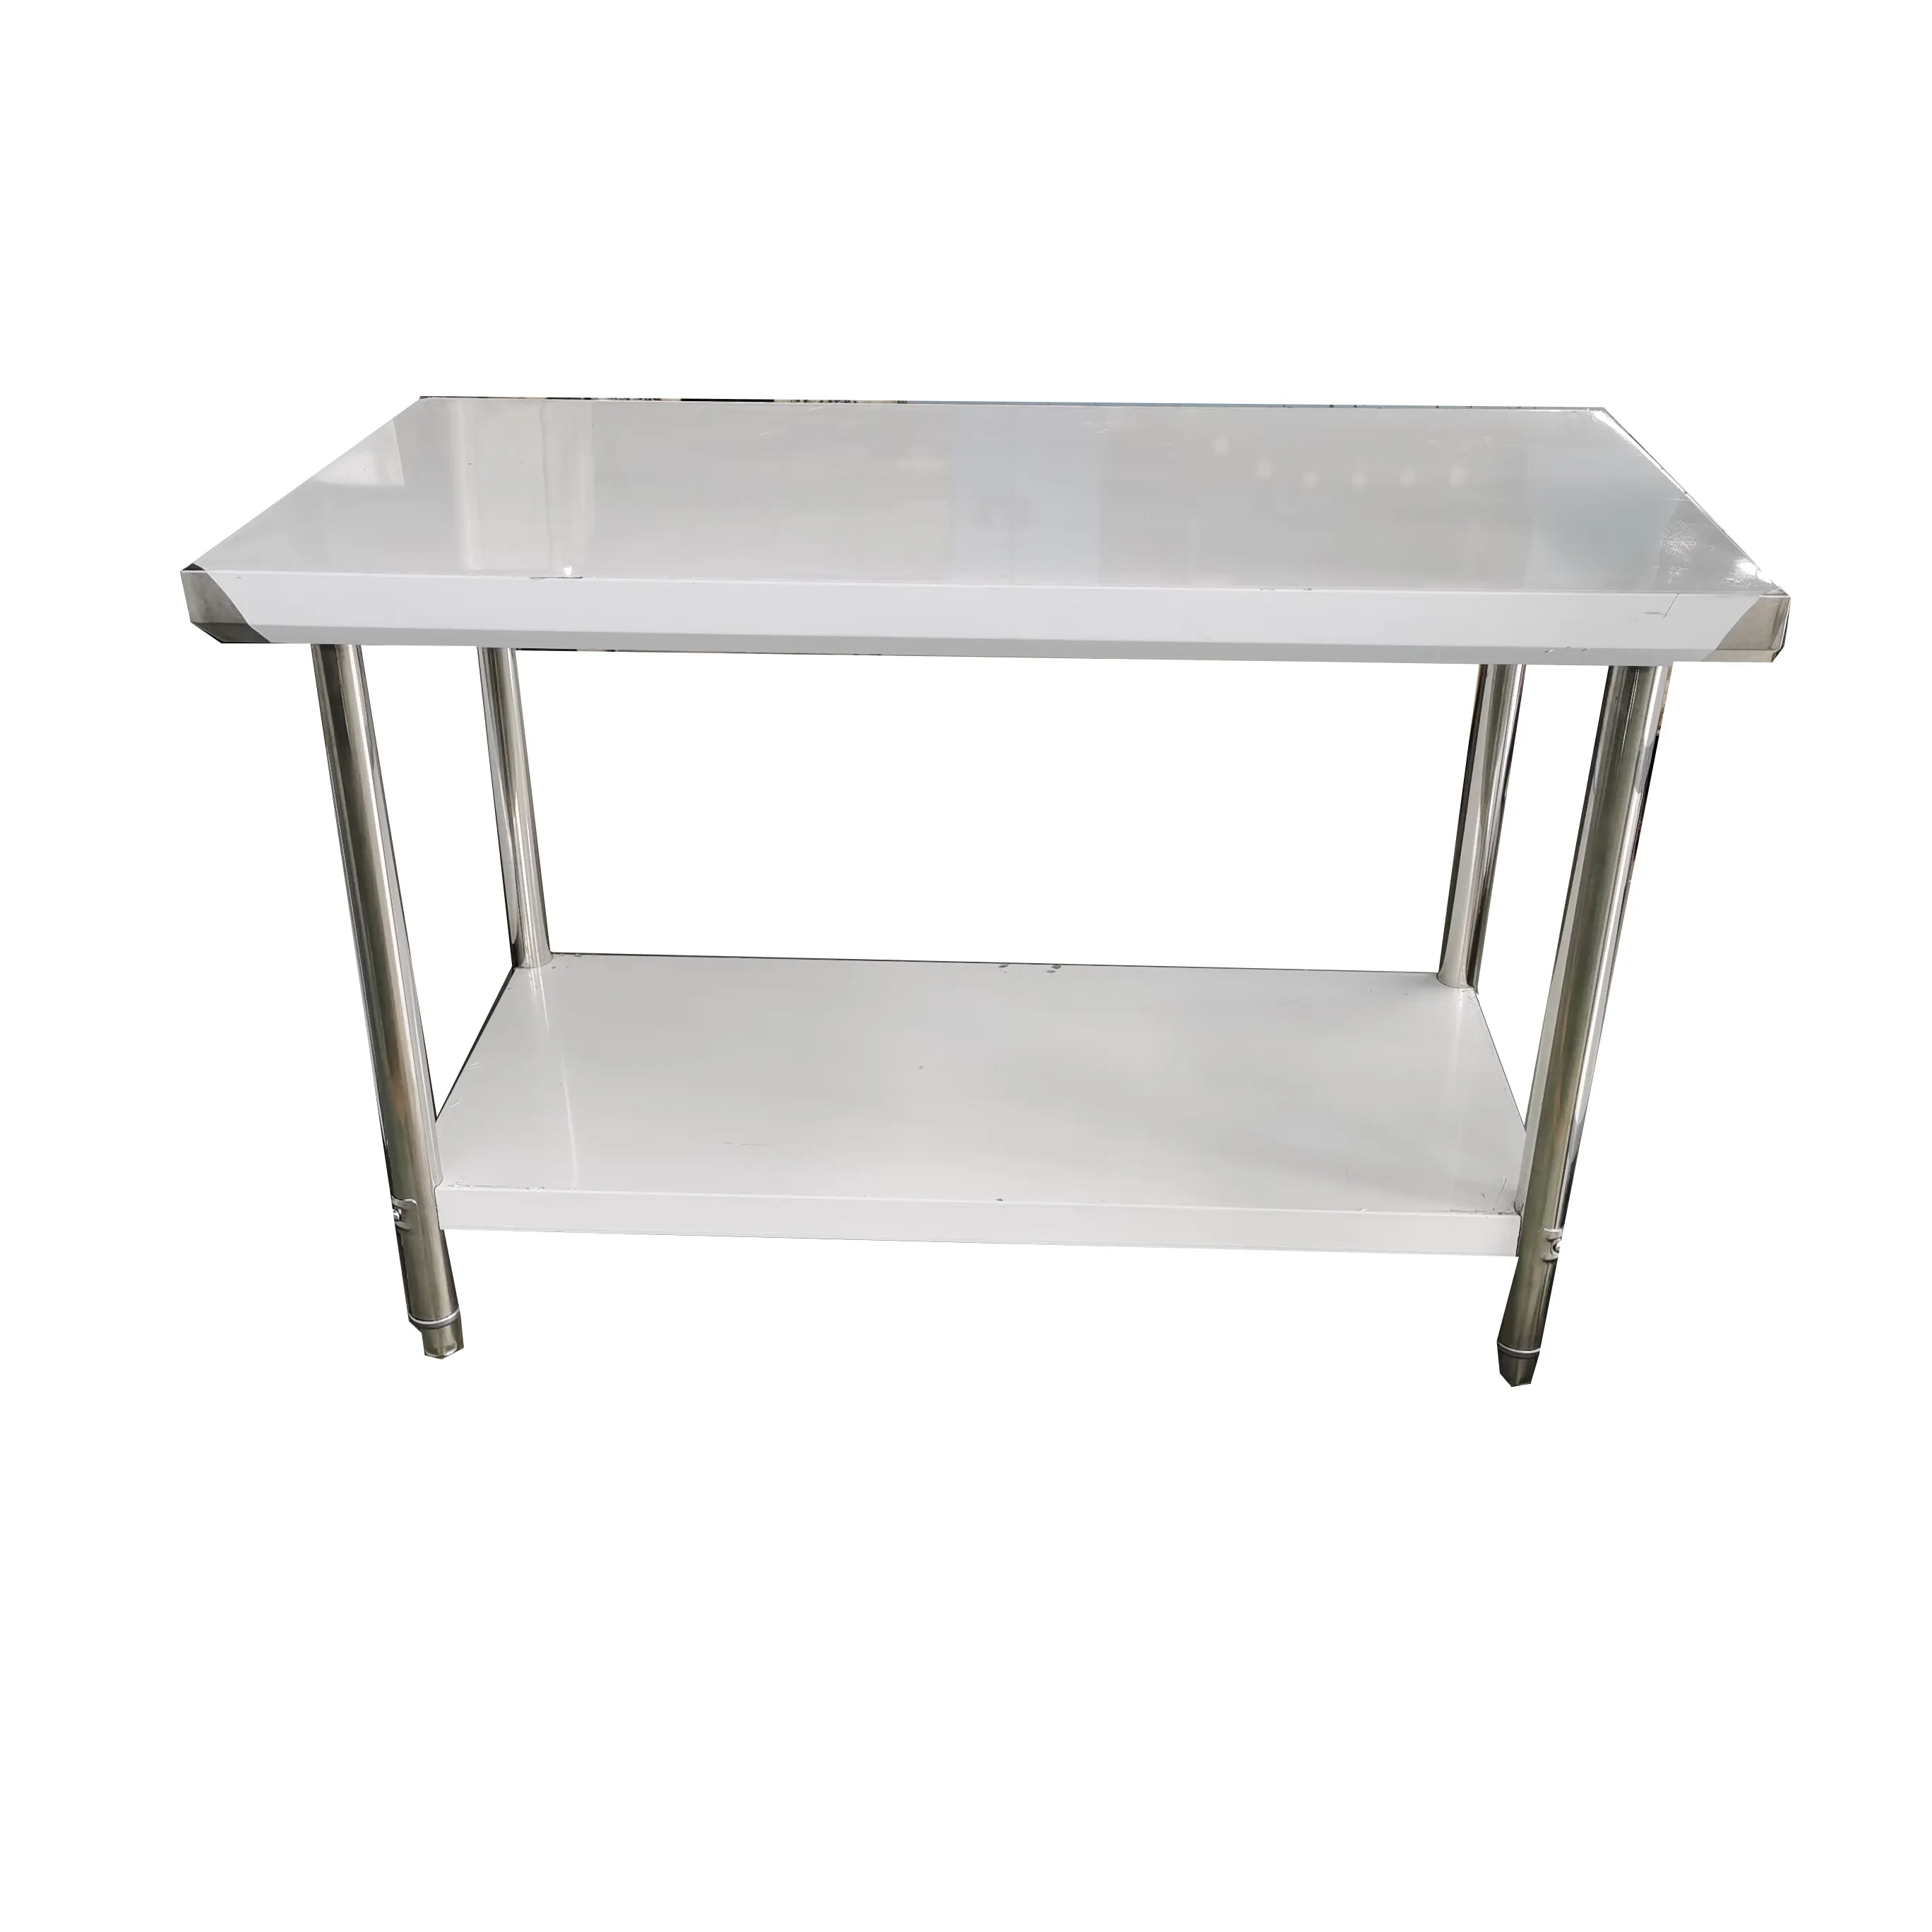 Guanbai Heavy Duty Restaurant Commercial Stainless Steel Catering Kitchen Equipment for Hotel